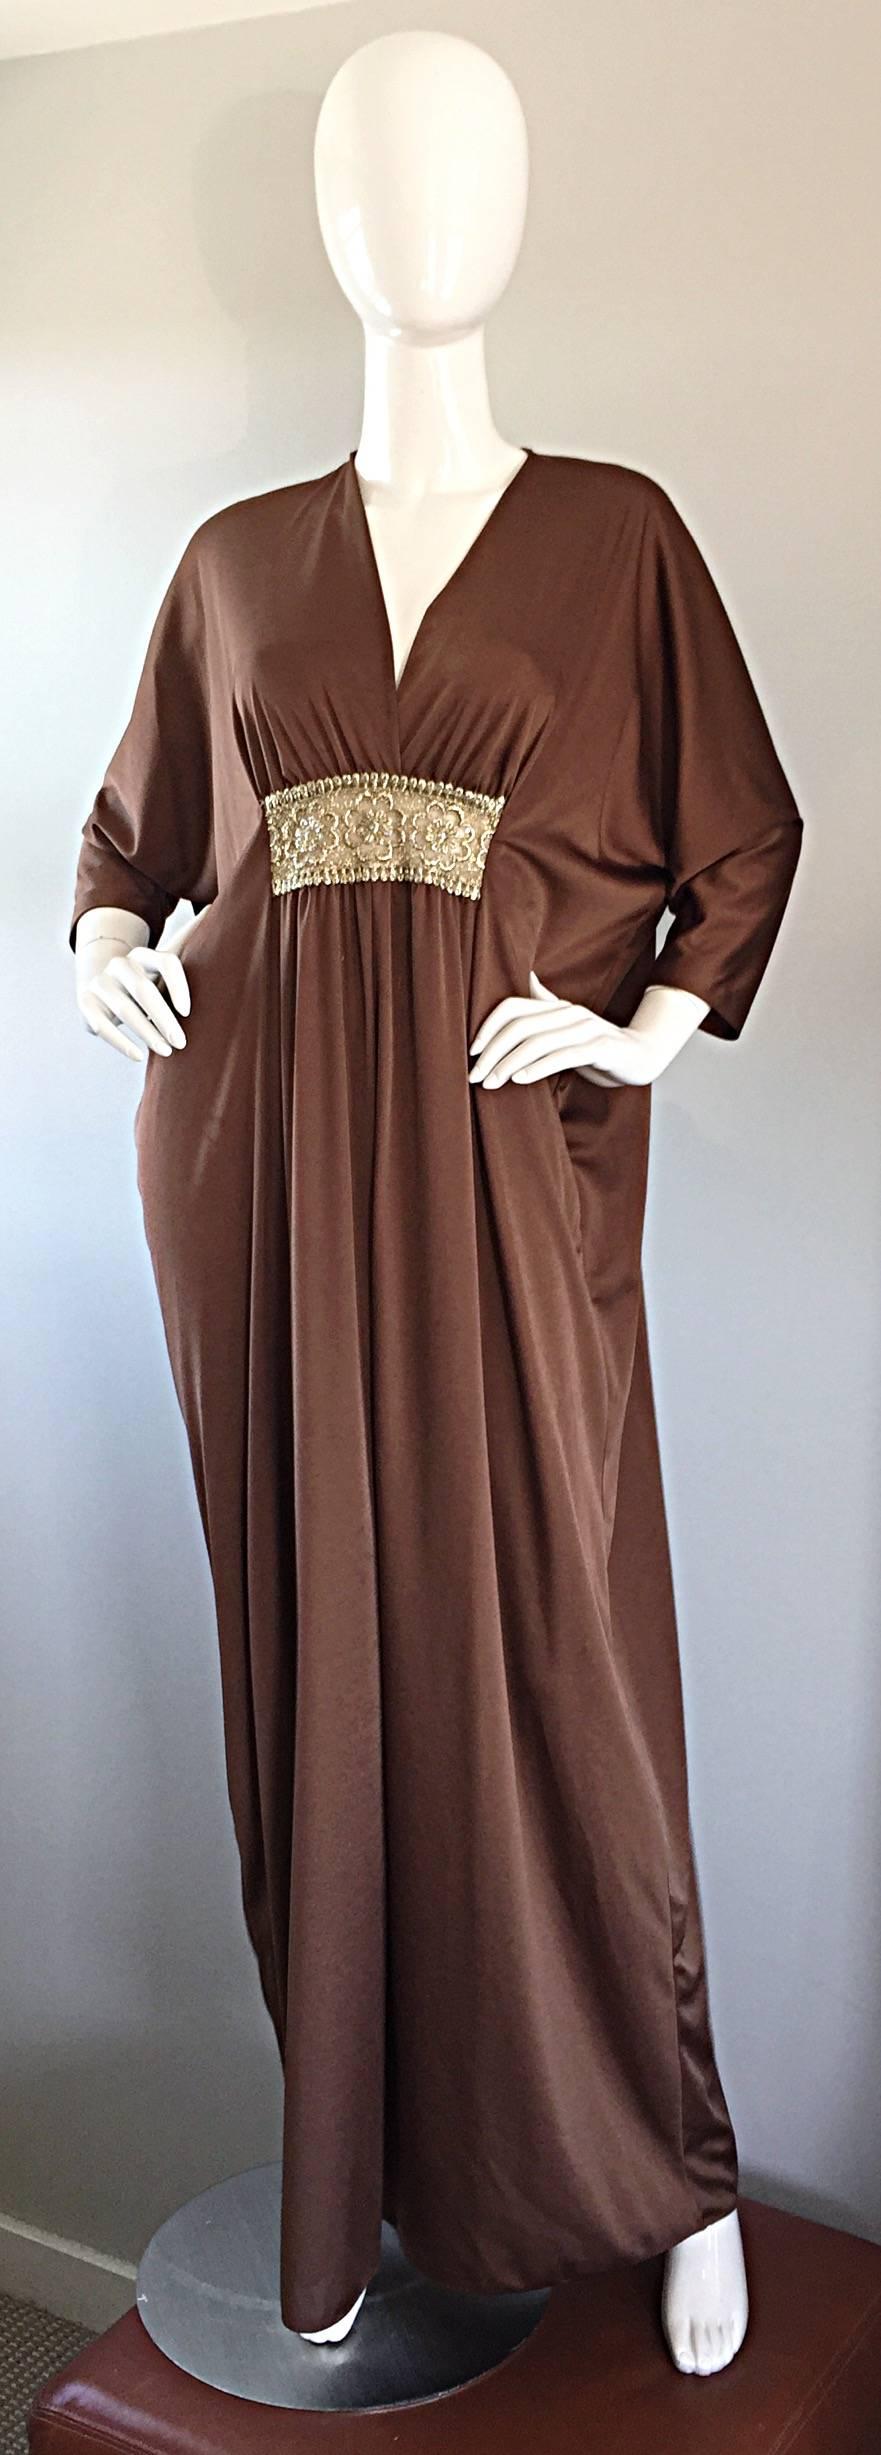 Rare vintage LUCIE ANN of Beverly Hills light brown / mocha caftan! Beautiful Grecian style, that drapes the body wonderfully! Gold metallic cut-out flowers at waist, with gold sequins, gives this kaftan some shape. Built in support that holds